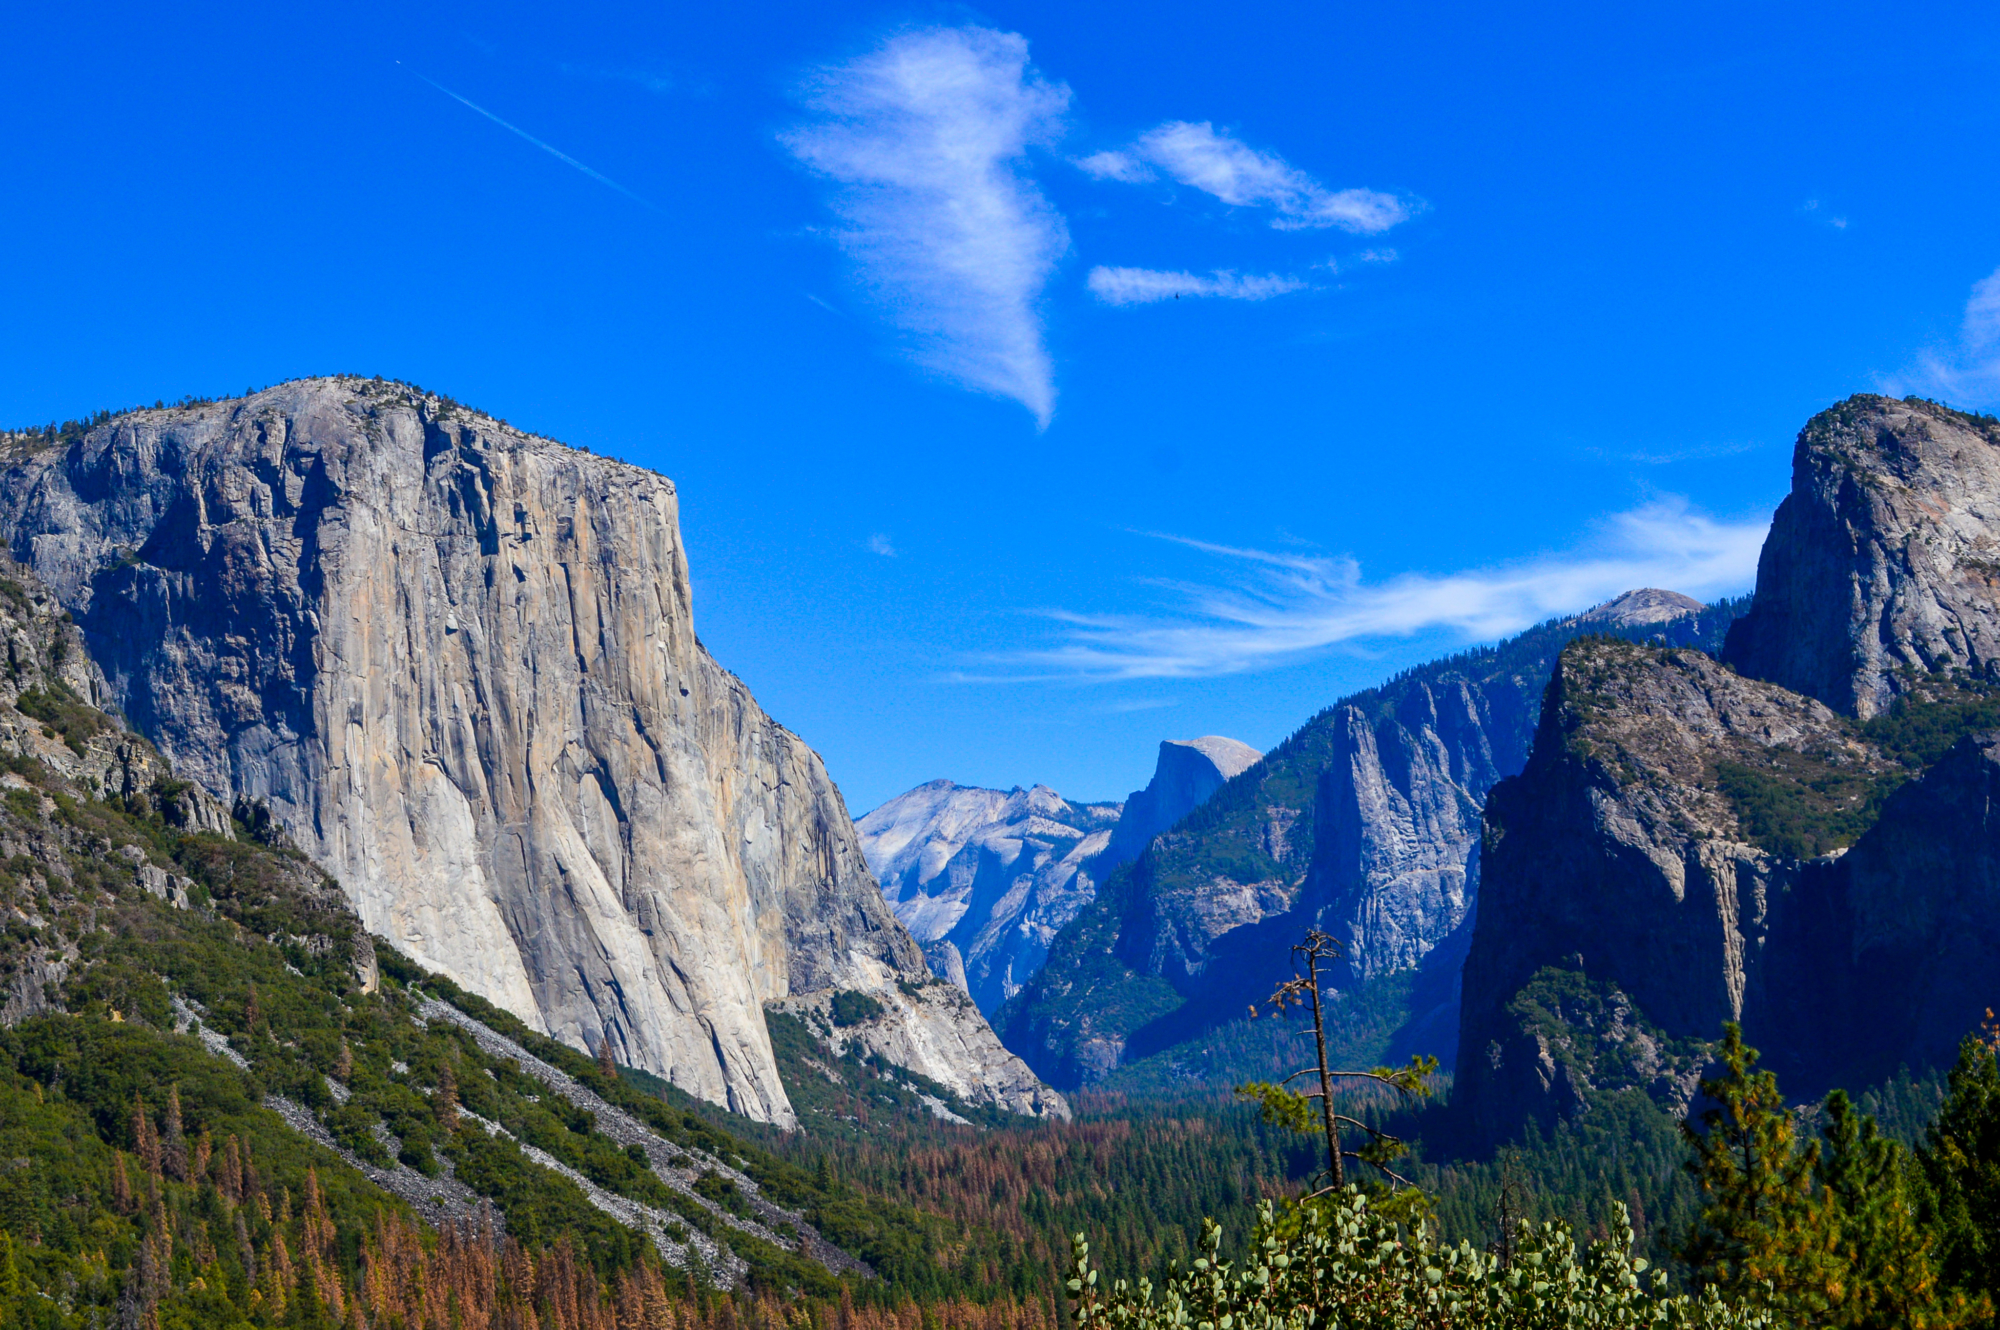 Experiencing The Breathtaking Tunnel View In Yosemite National Park